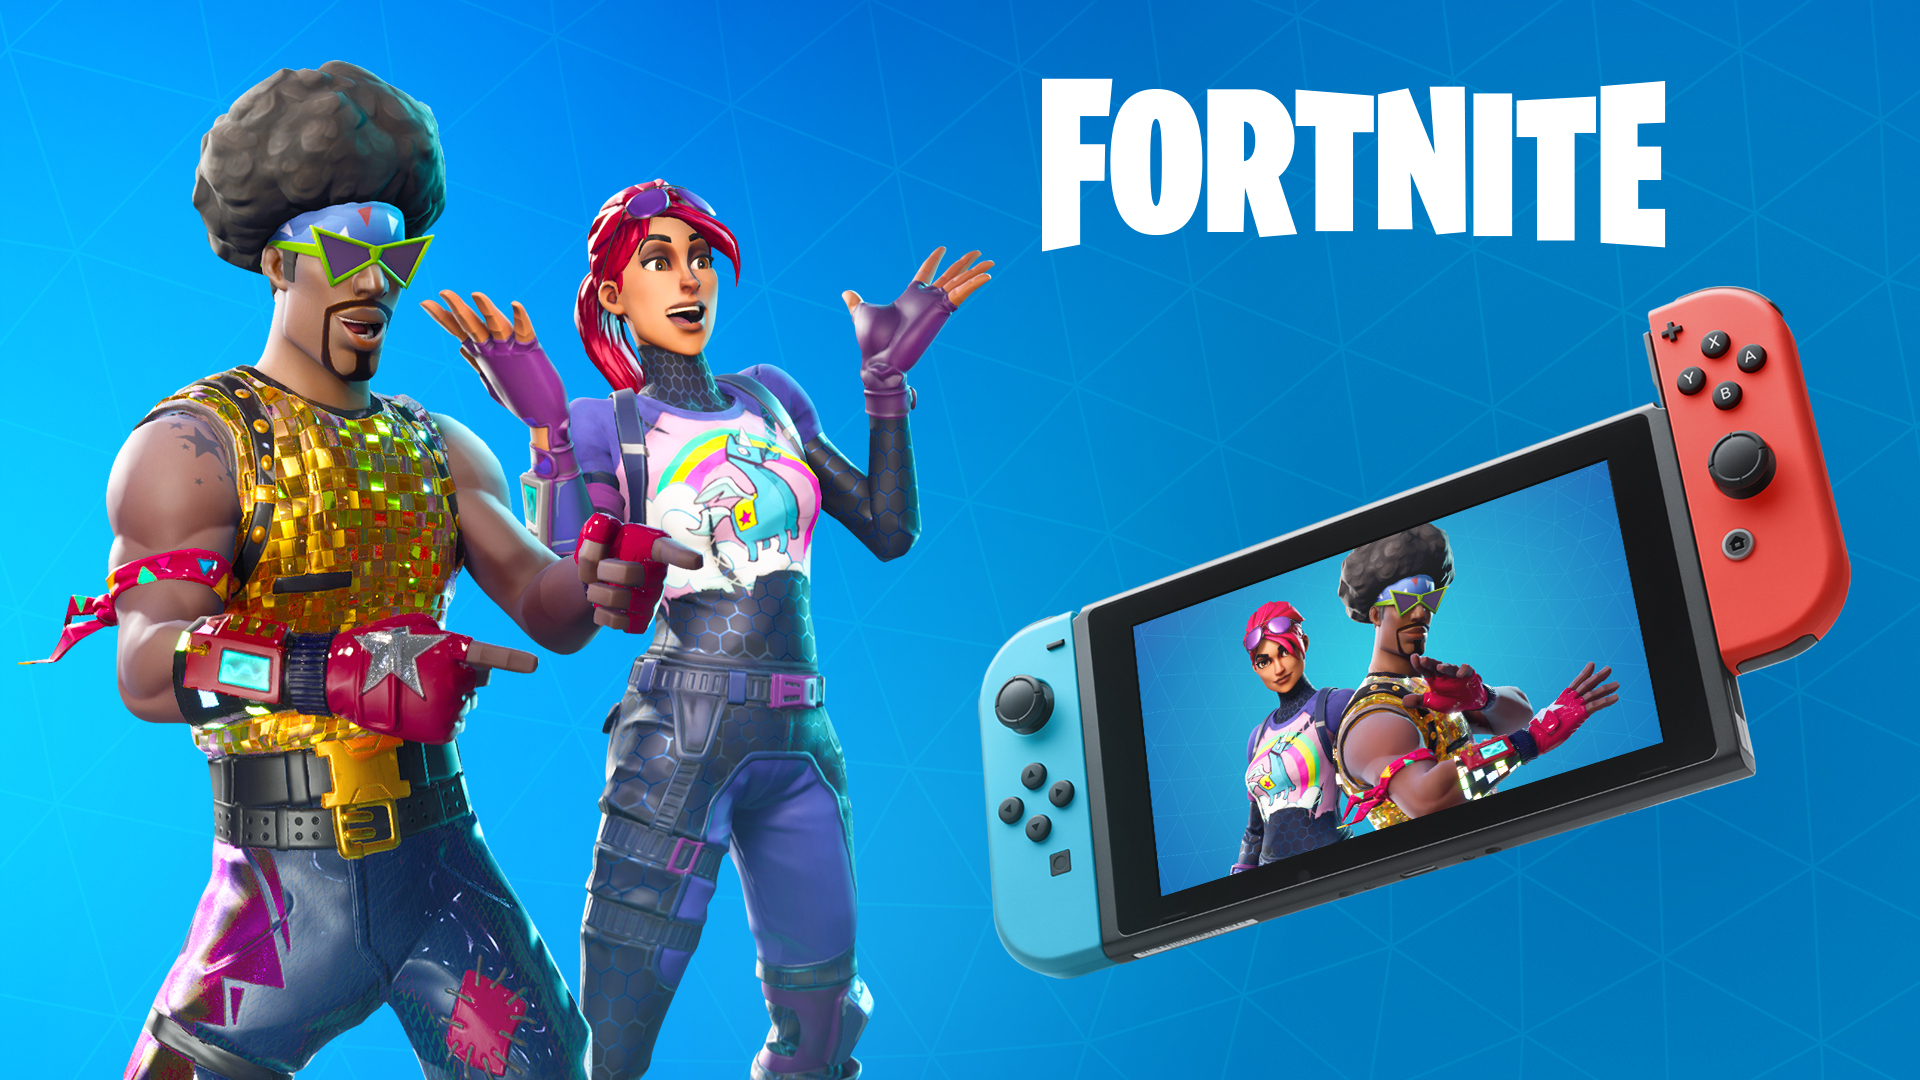 The Fortnite website hidden Nintendo login options so it like it's totally happening! (In case there was any doubt) | GamesRadar+